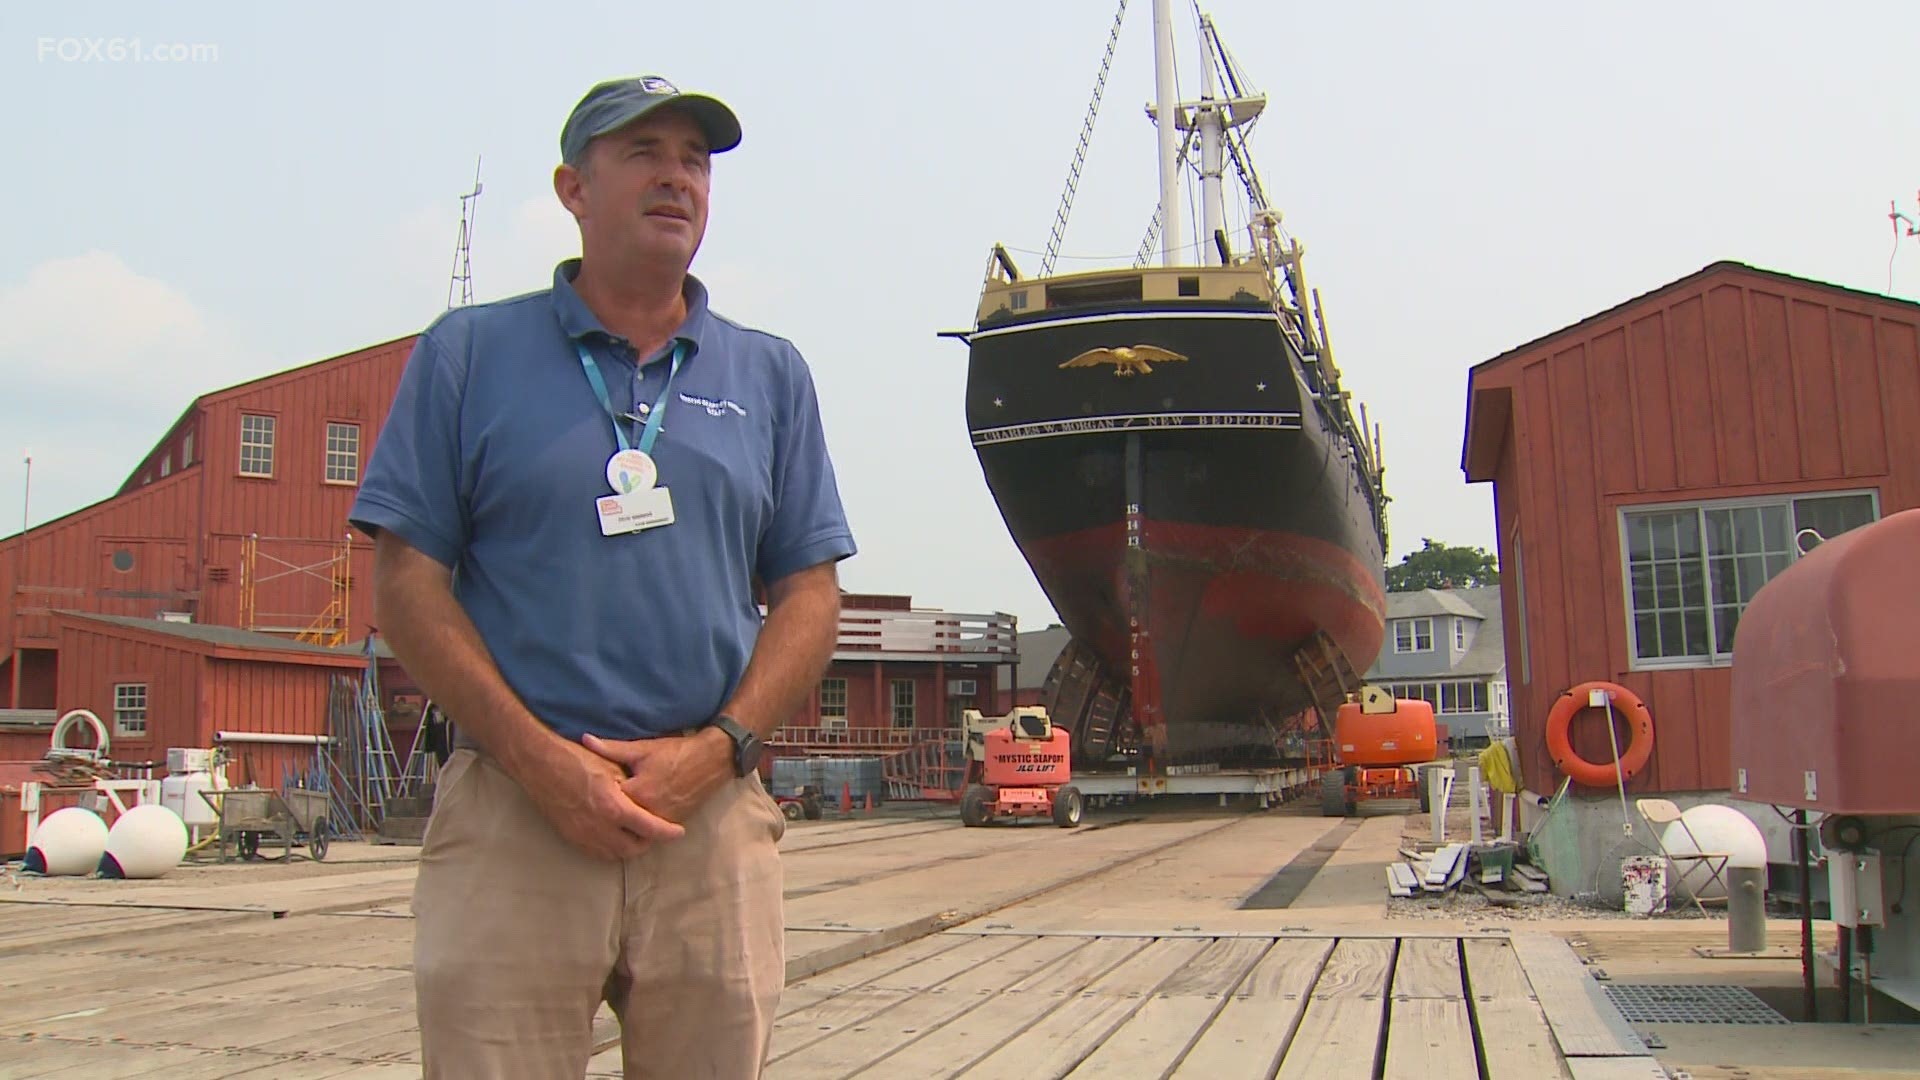 Monday was spent raising the Morgan out of the Mystic River, on Tuesday the work began on the ship which had not been on the docks in five years.